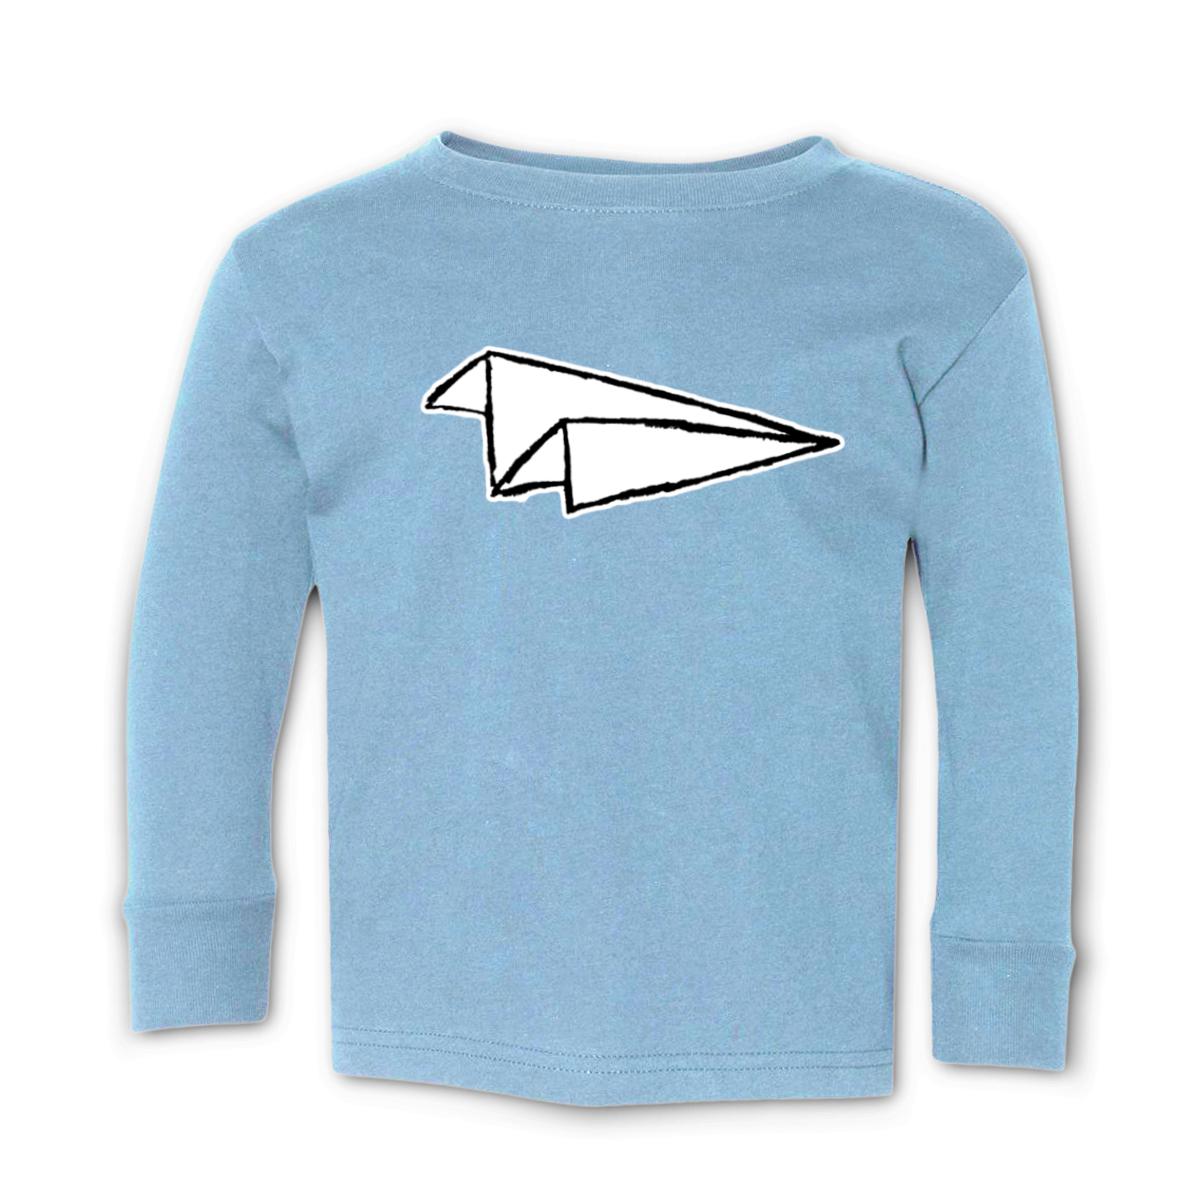 Airplane Sketch Toddler Long Sleeve Tee 2T light-blue